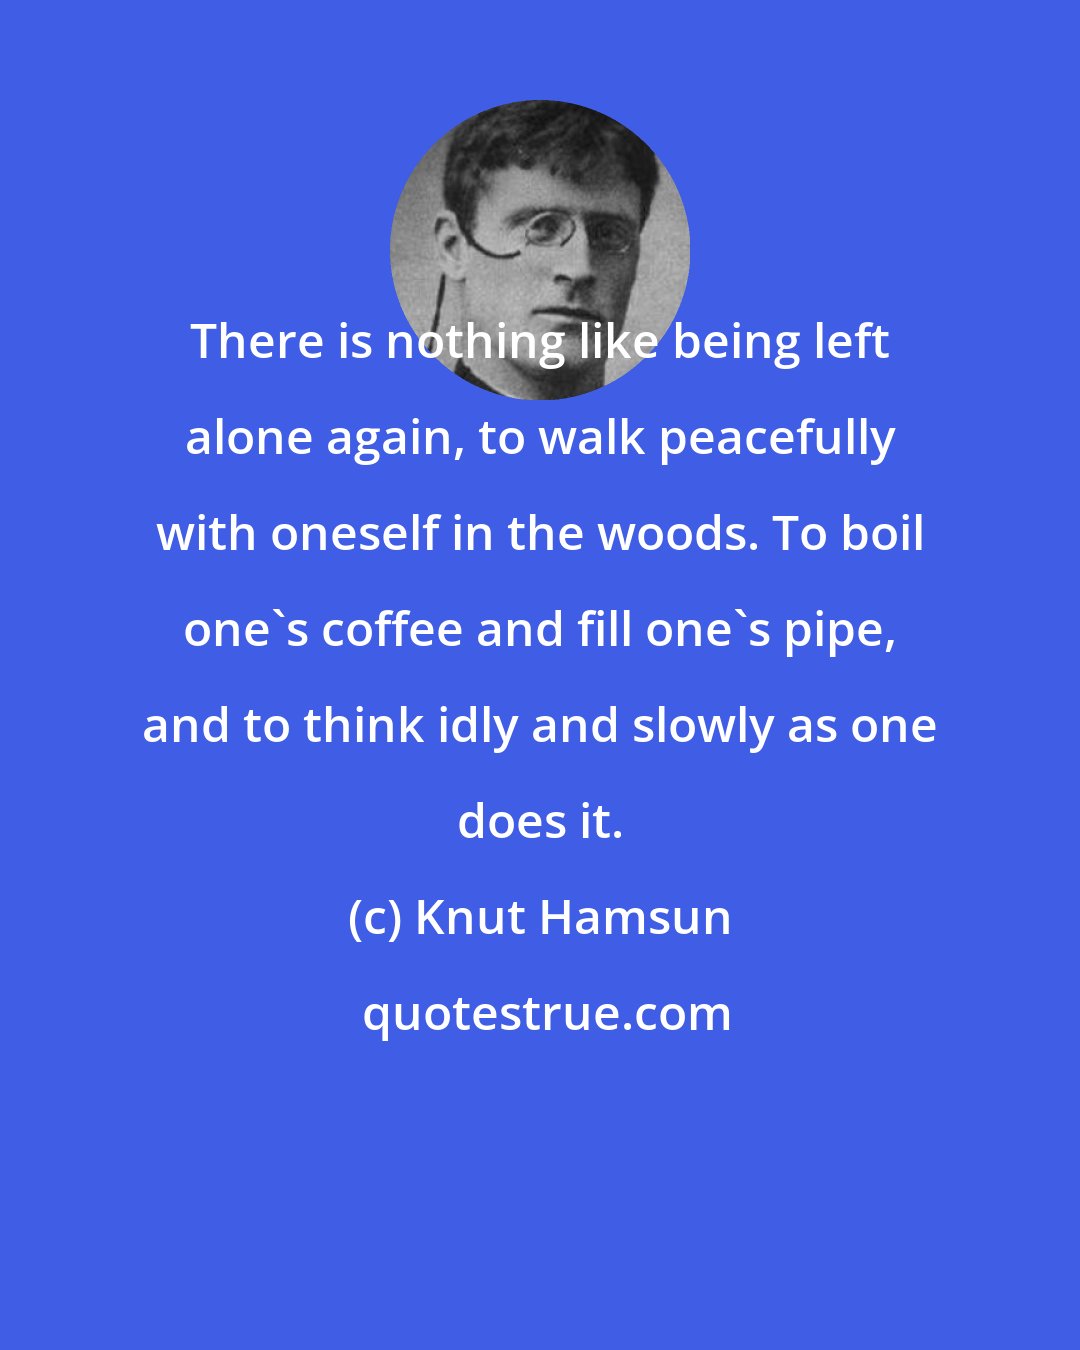 Knut Hamsun: There is nothing like being left alone again, to walk peacefully with oneself in the woods. To boil one's coffee and fill one's pipe, and to think idly and slowly as one does it.